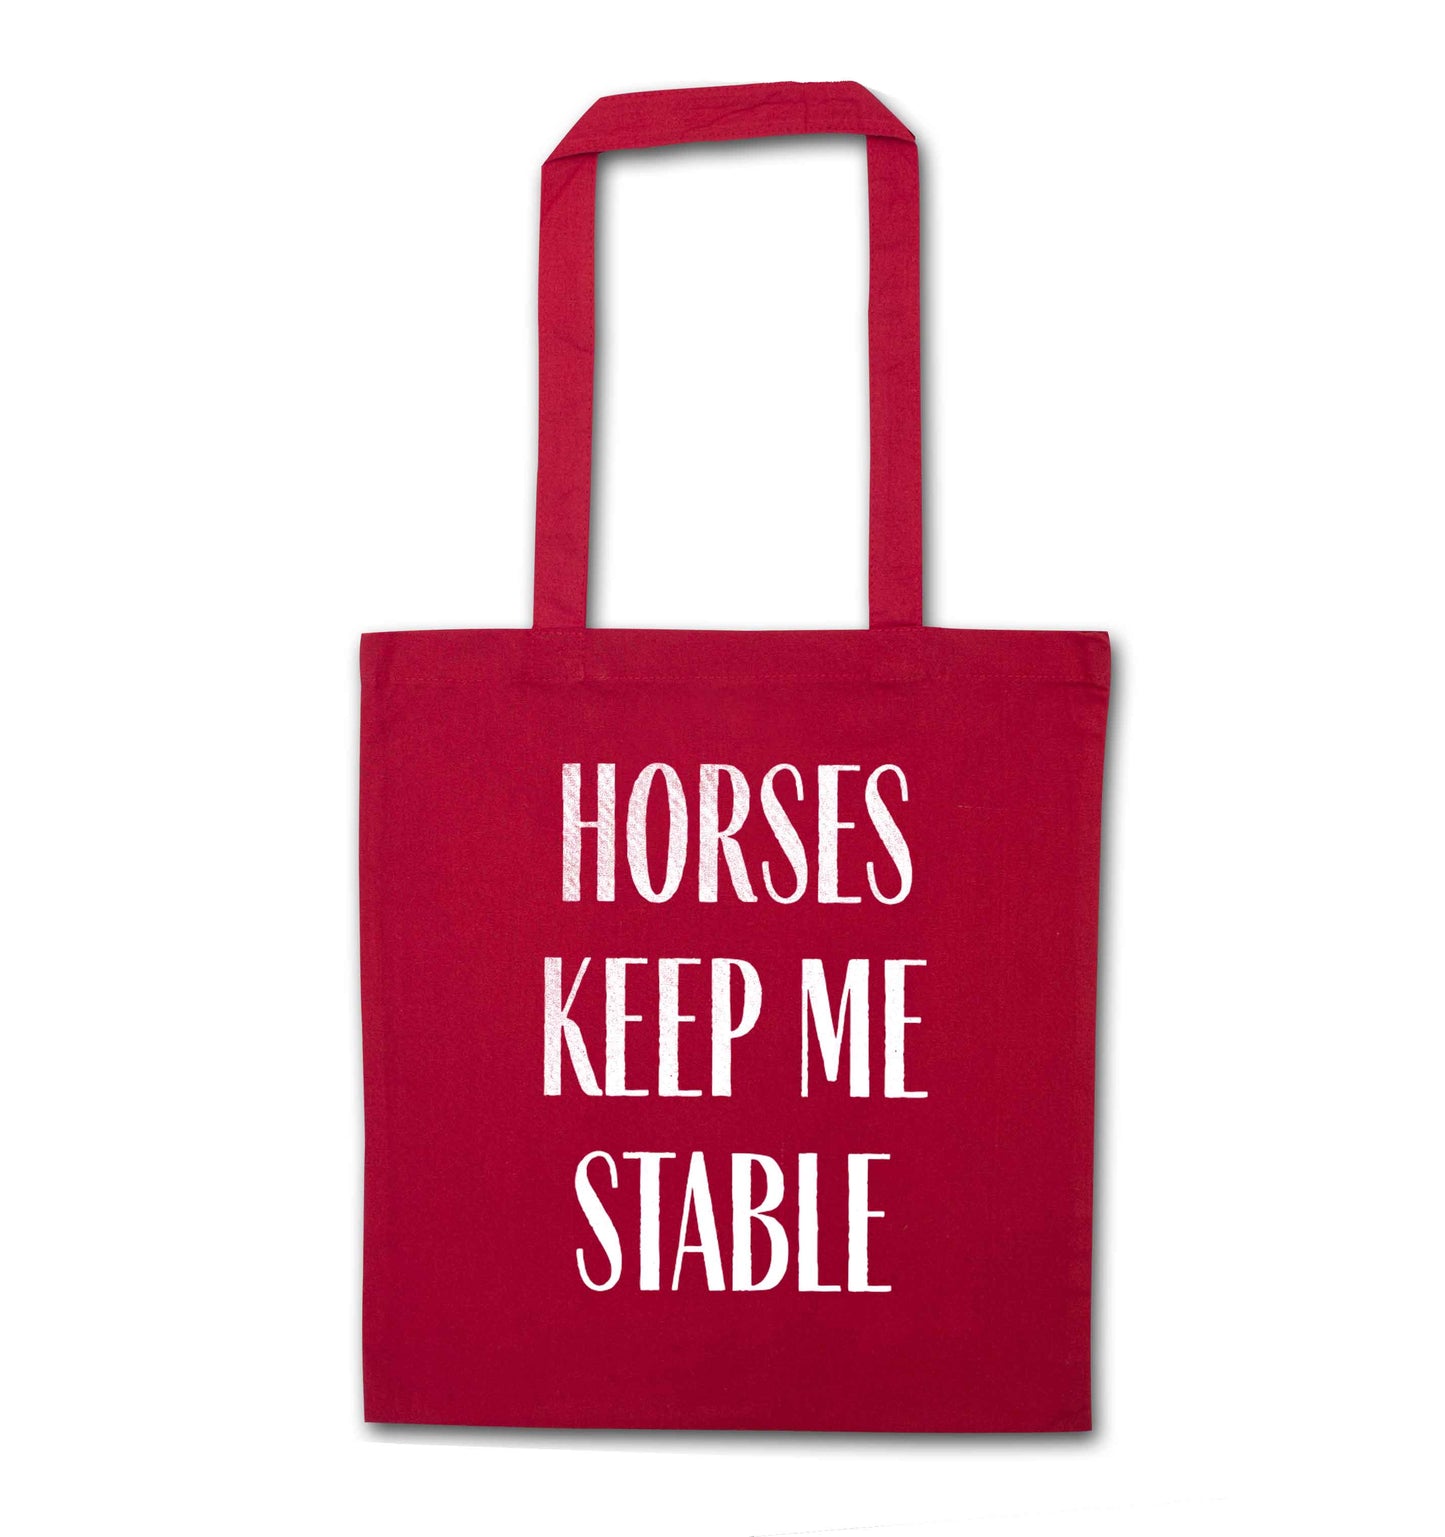 Horses keep me stable red tote bag